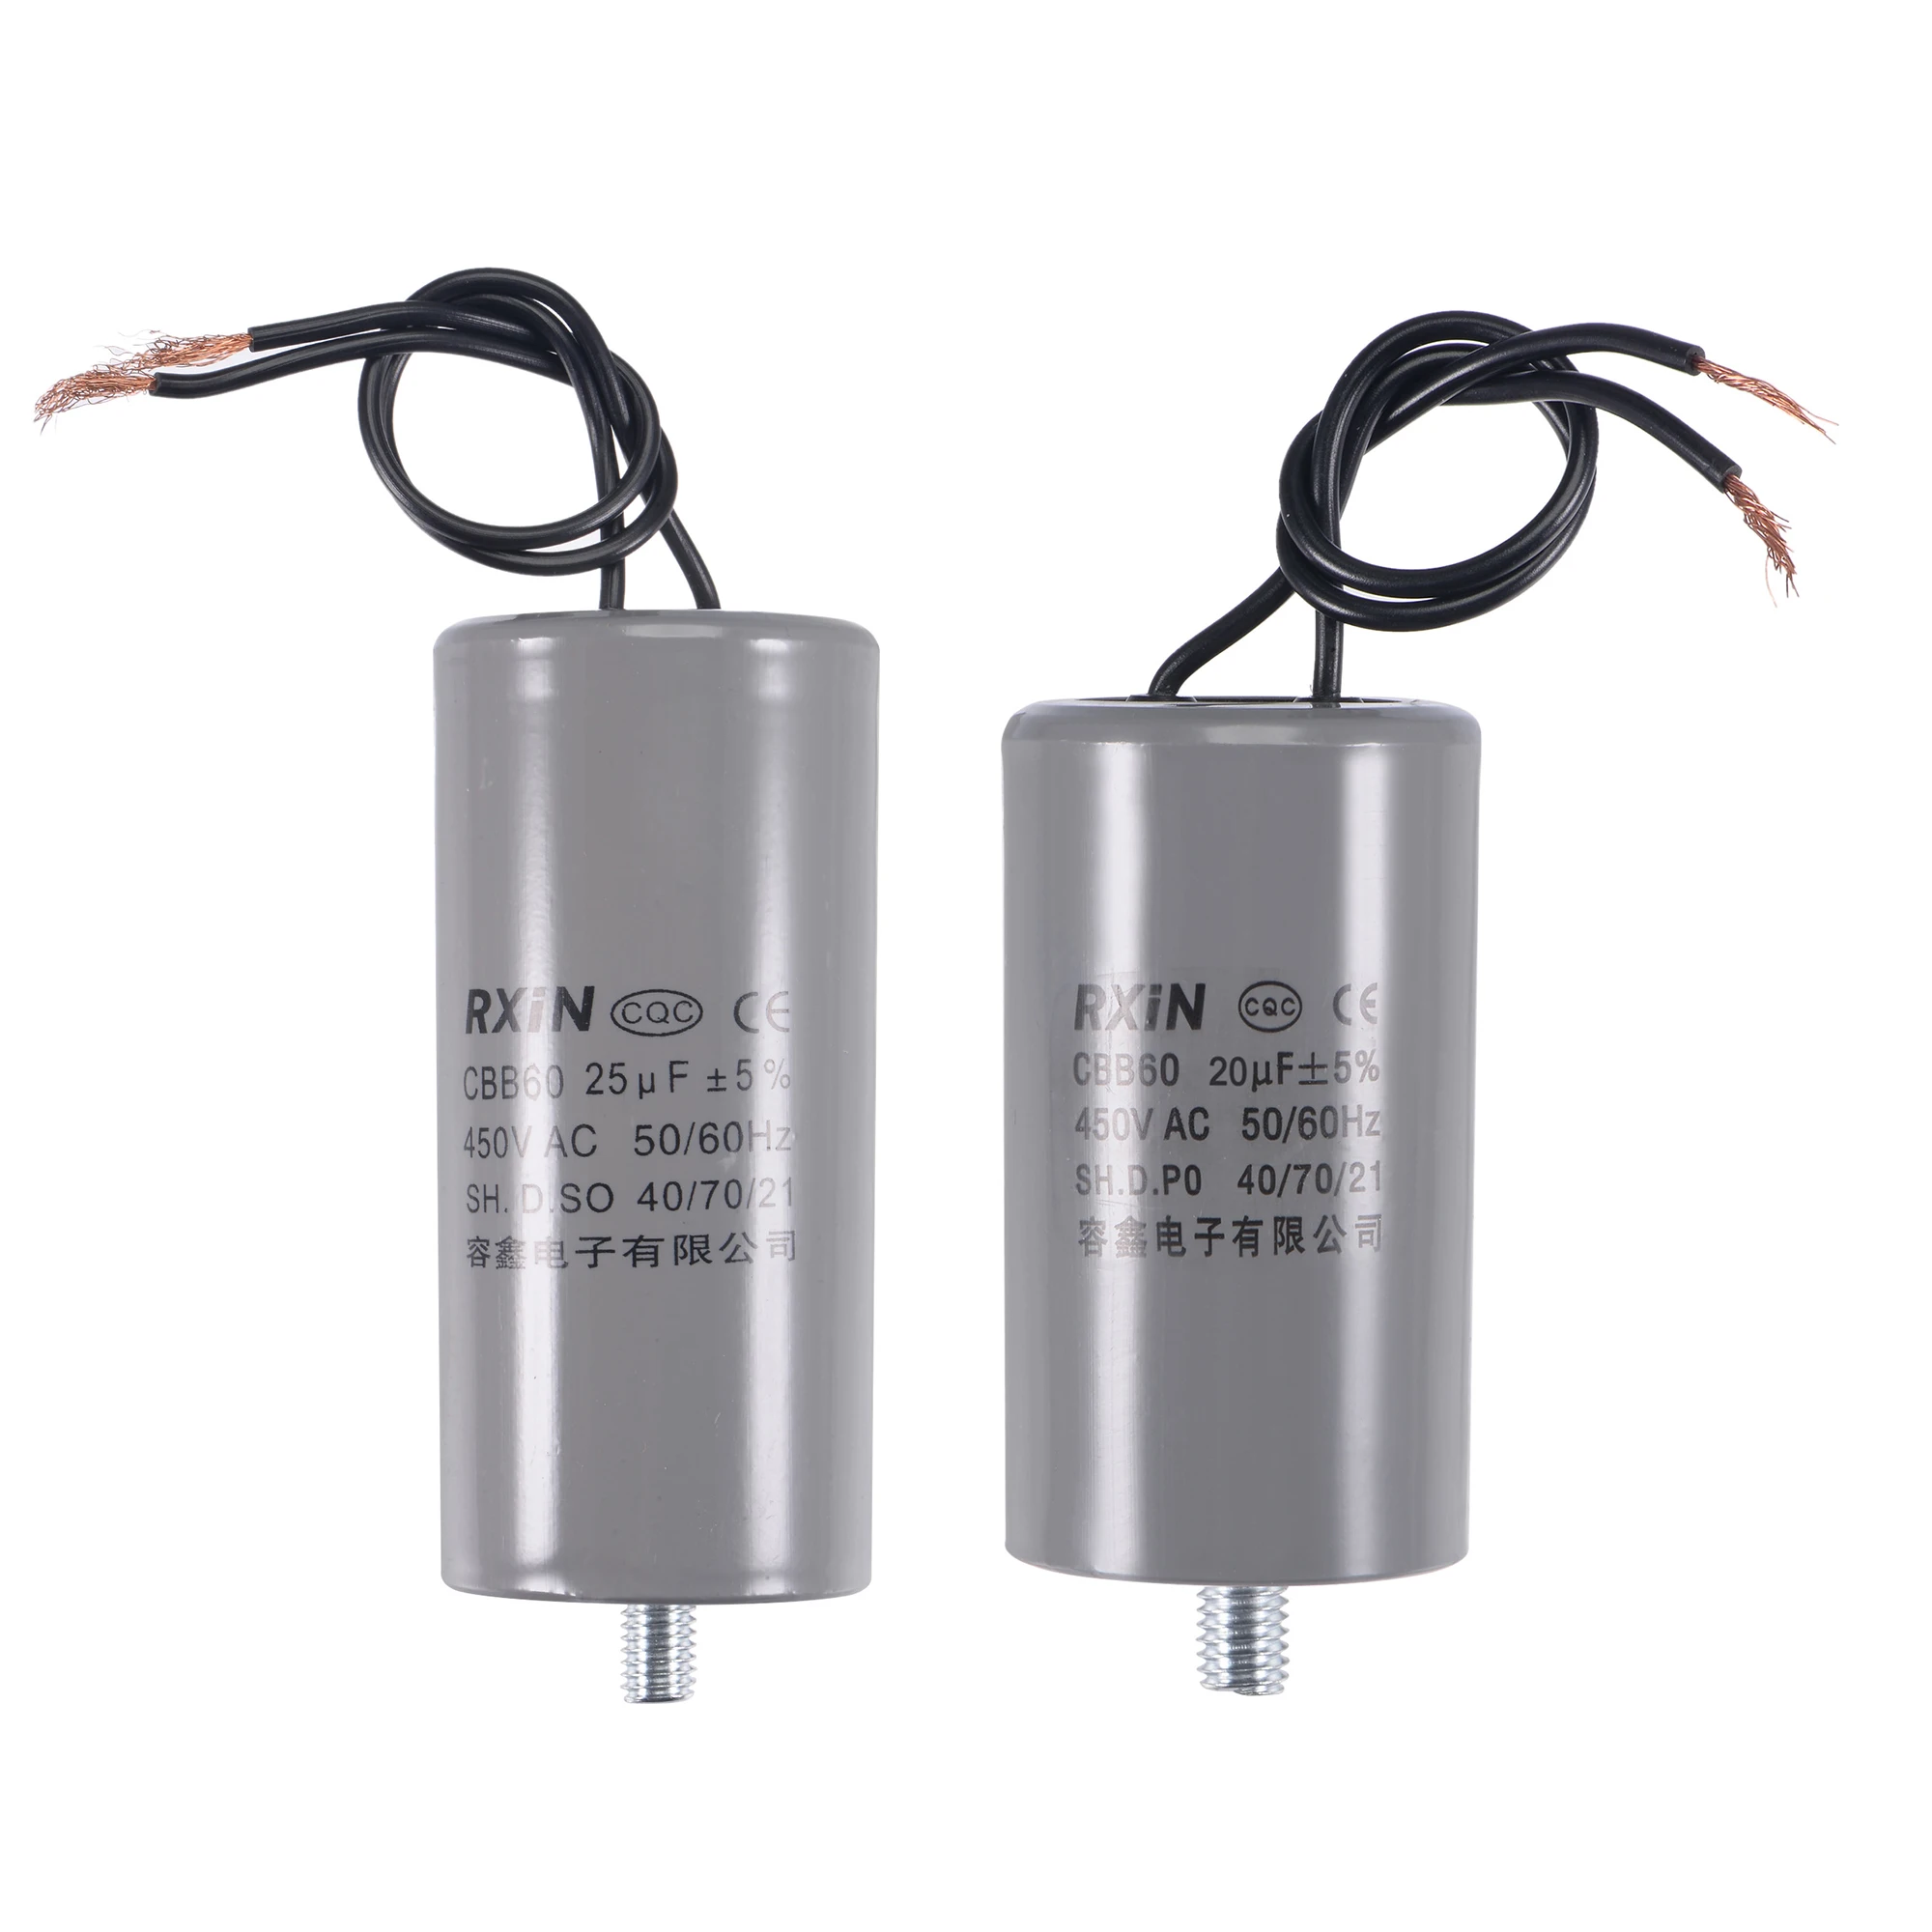 

CBB60 Motor Run Capacitor AC 450V 20uF 25uF 2 Wires 50/60Hz Cylinder 74x40 98x45mm with M8 Fixing Stud for Fans Washing Machines